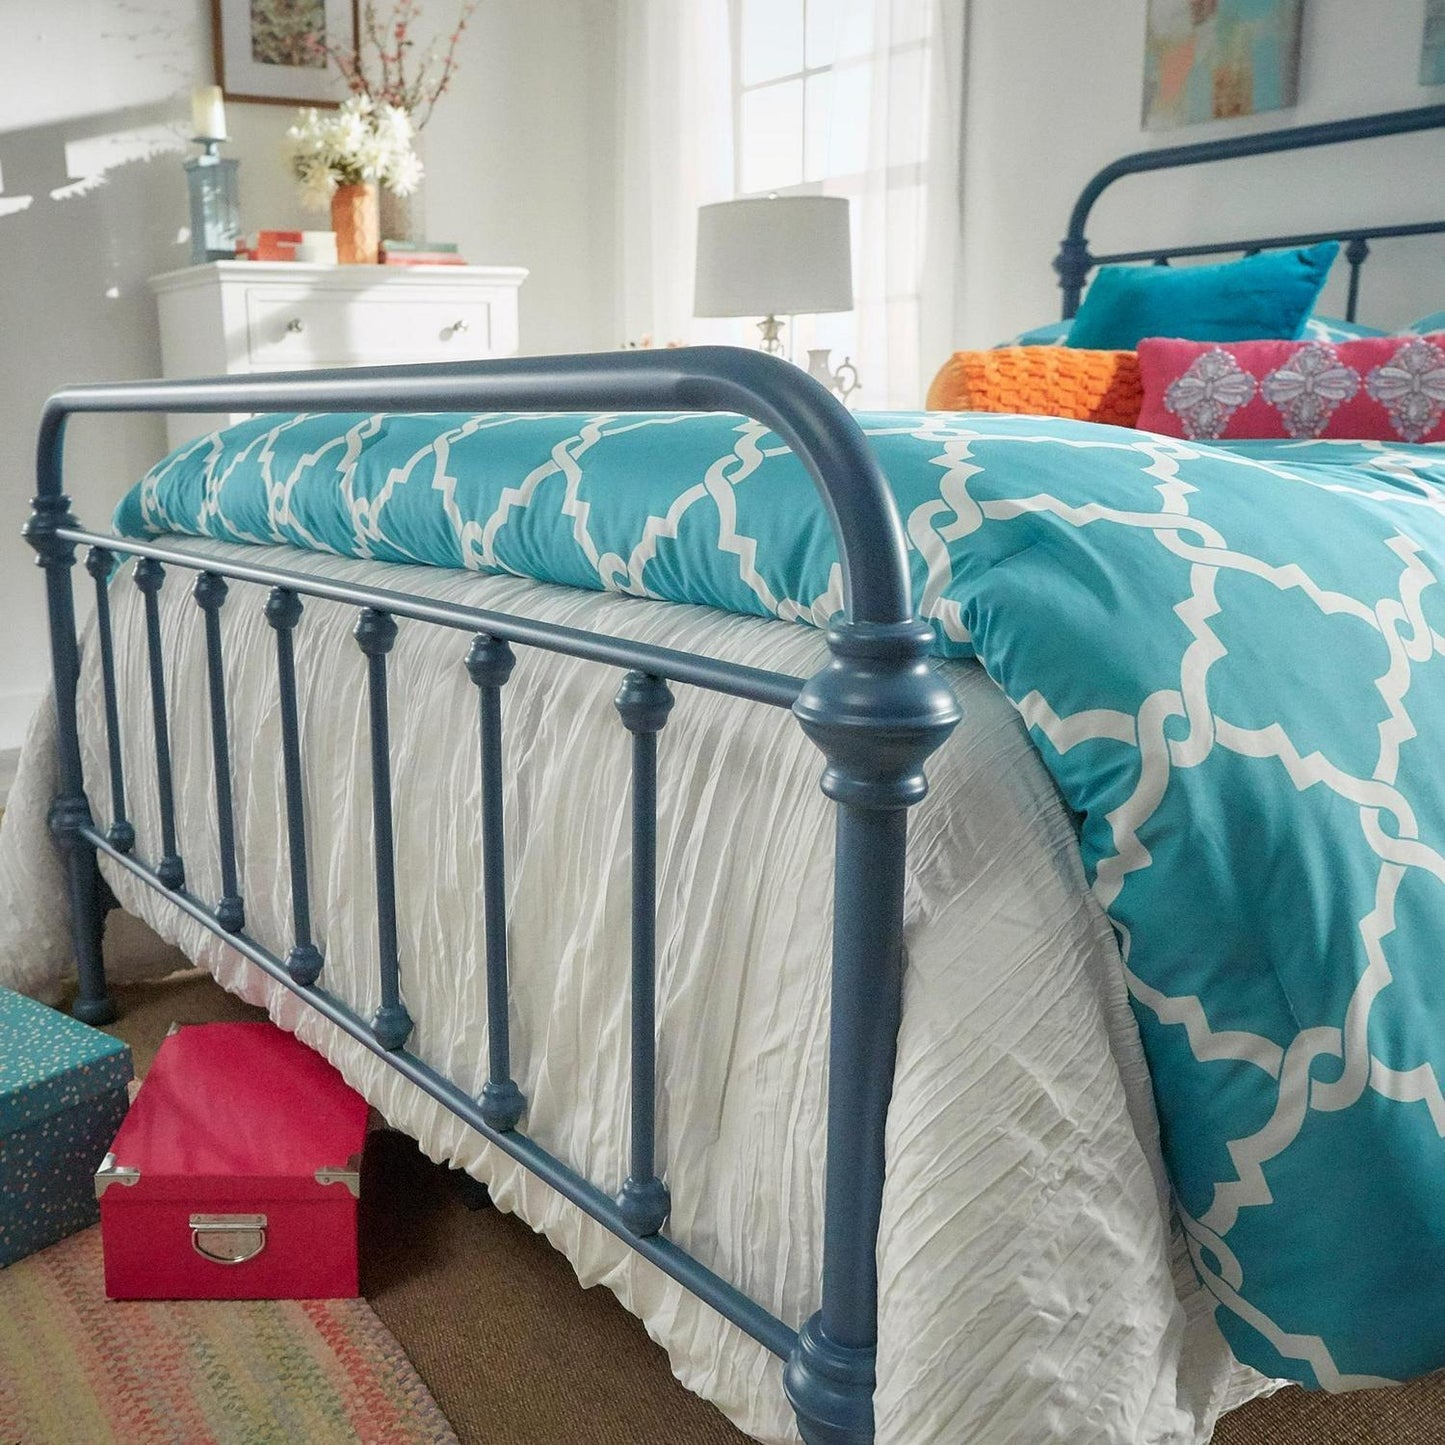 TWIN Size Iron Bed Classic Country Style in Cool Blue Steel Finish